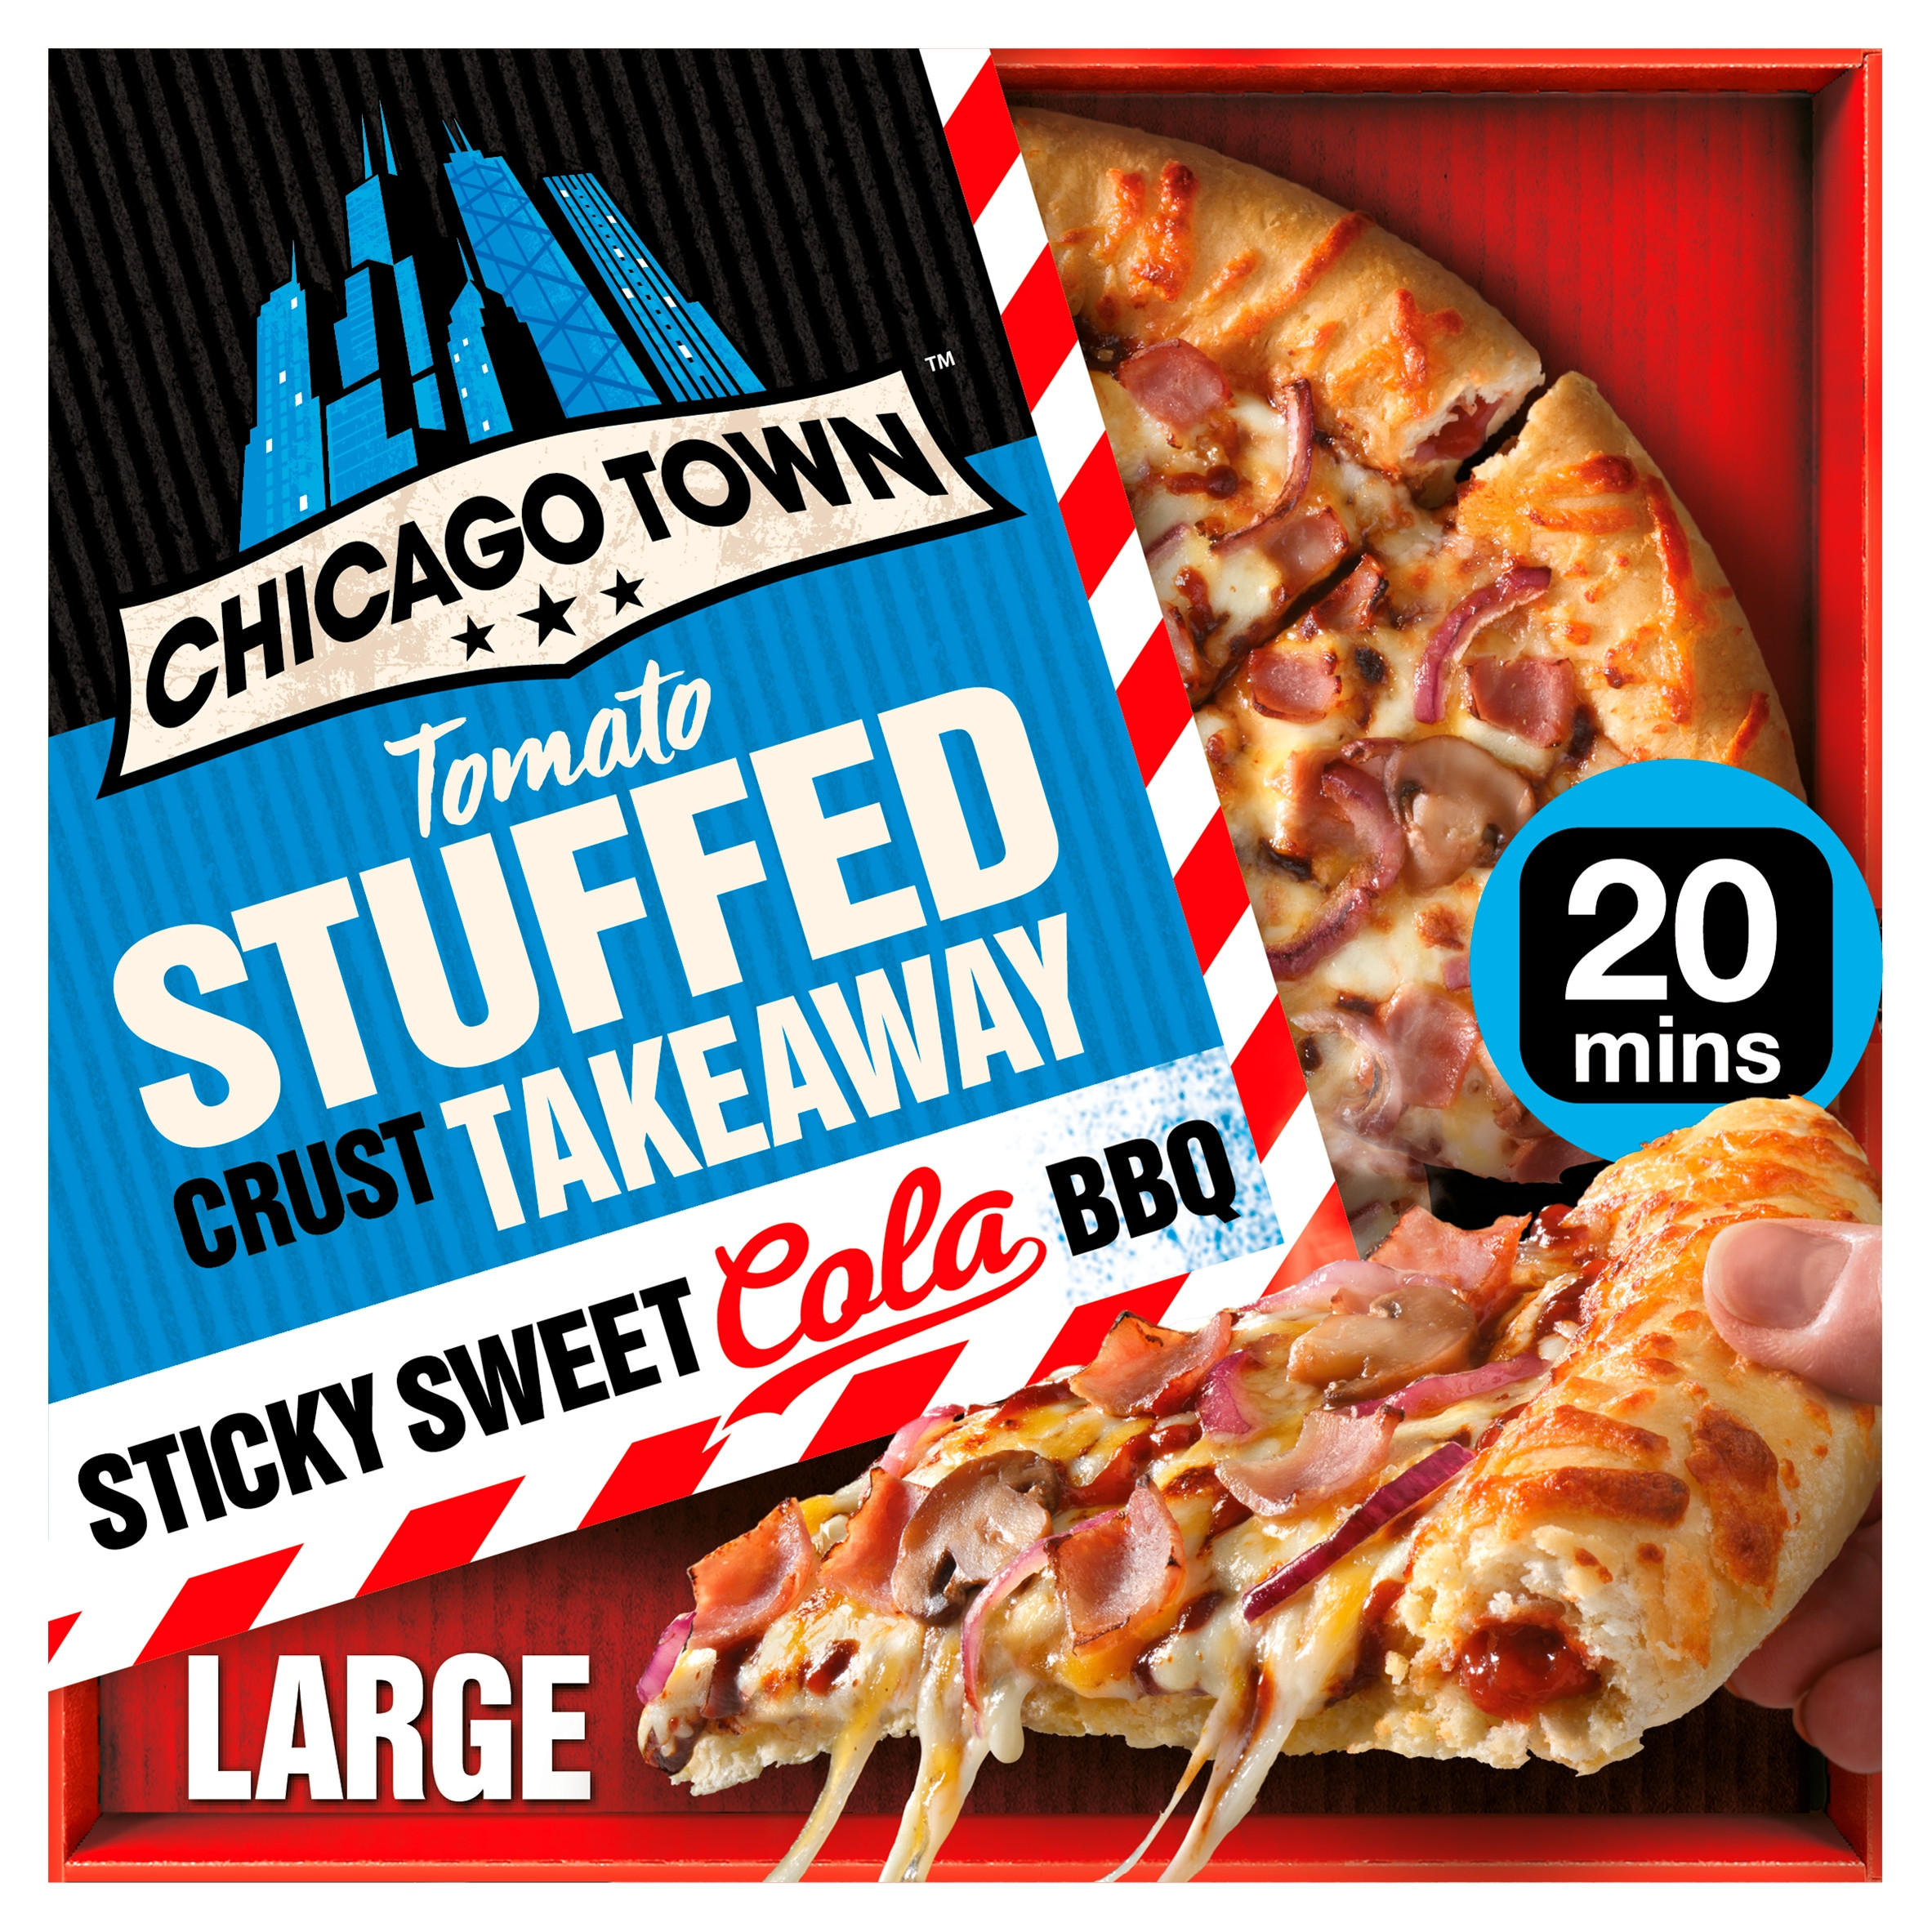 Chicago Town Takeaway Large Stuffed Crust Sticky Sweet Cola BBQ 650g